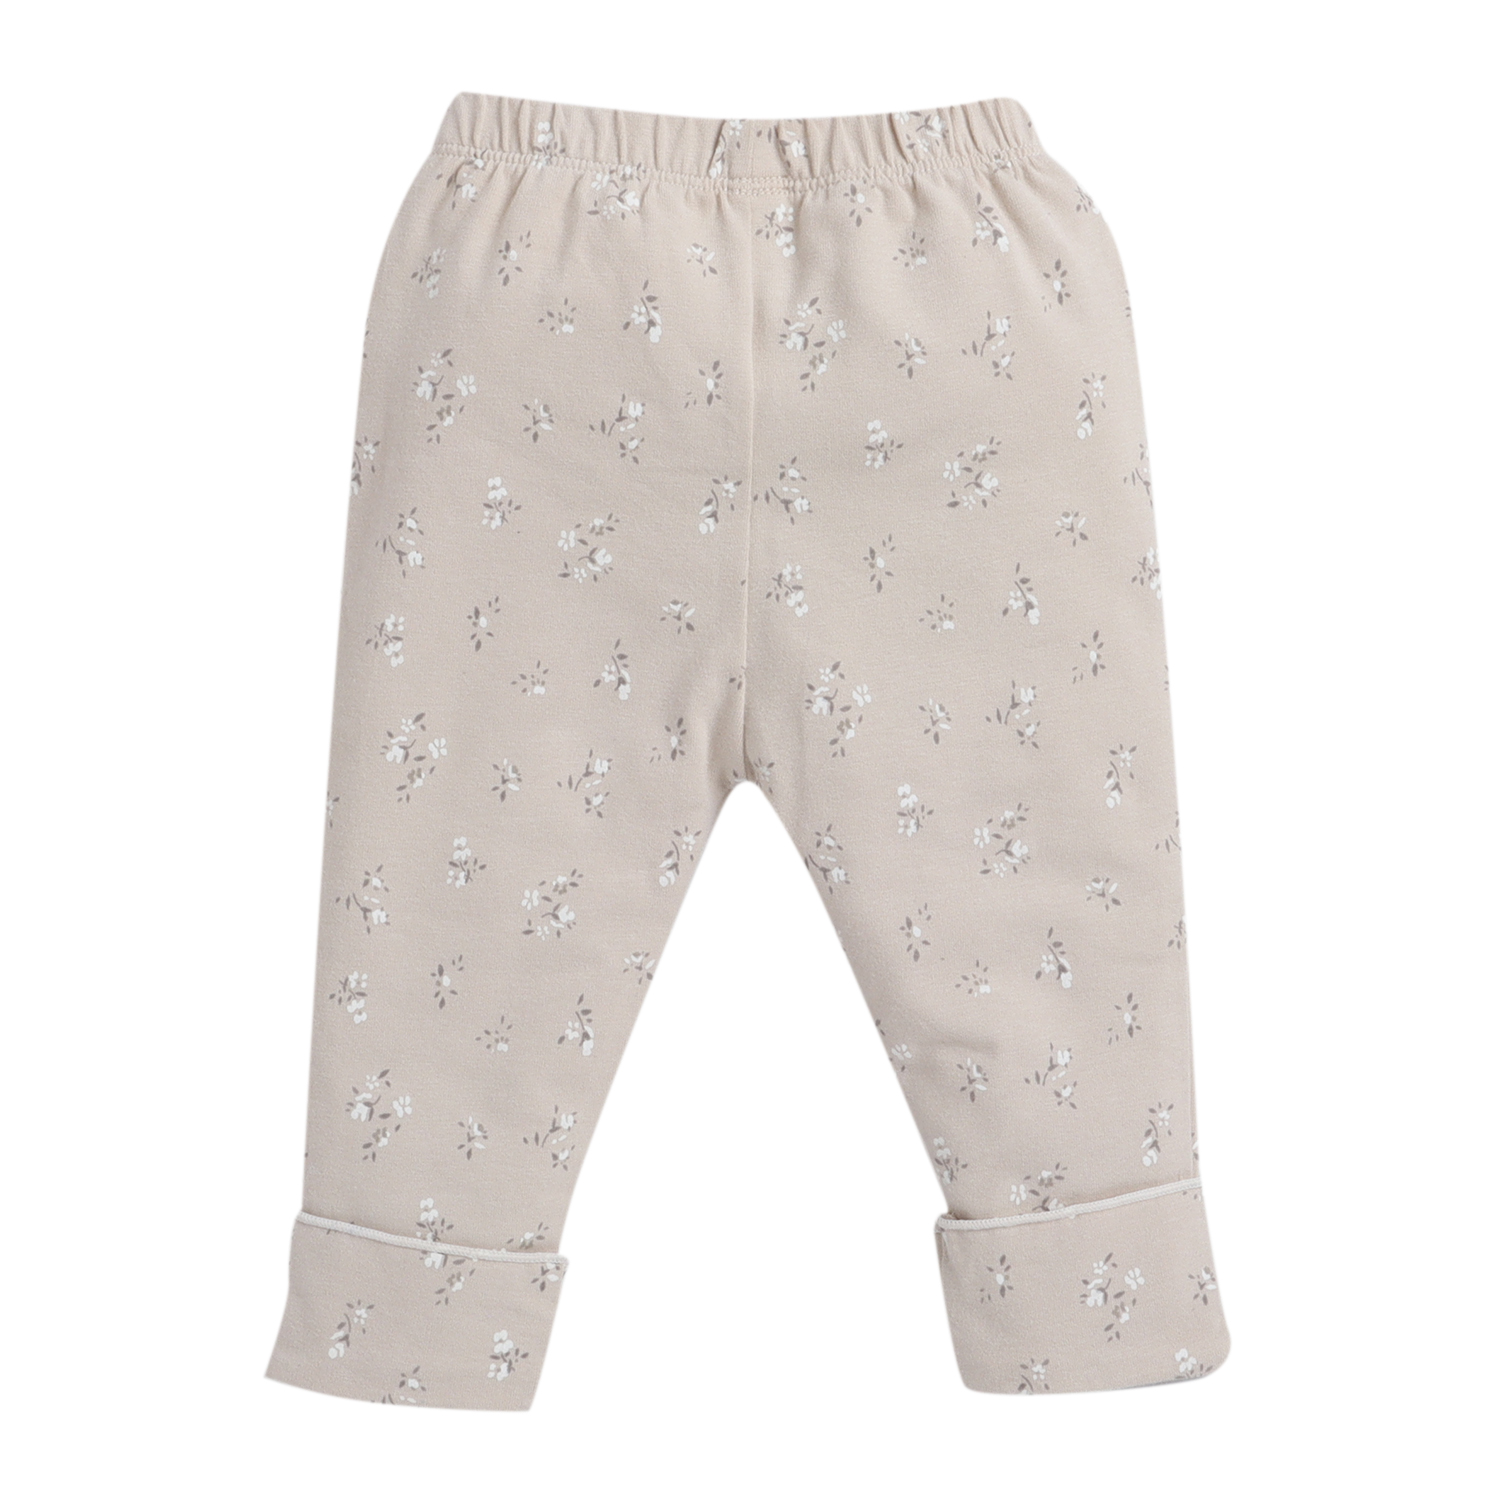 Buy BAYBEE Cotton Kids Pajama Leggings for New Born(Assorted)(0-6Months) at  Amazon.in